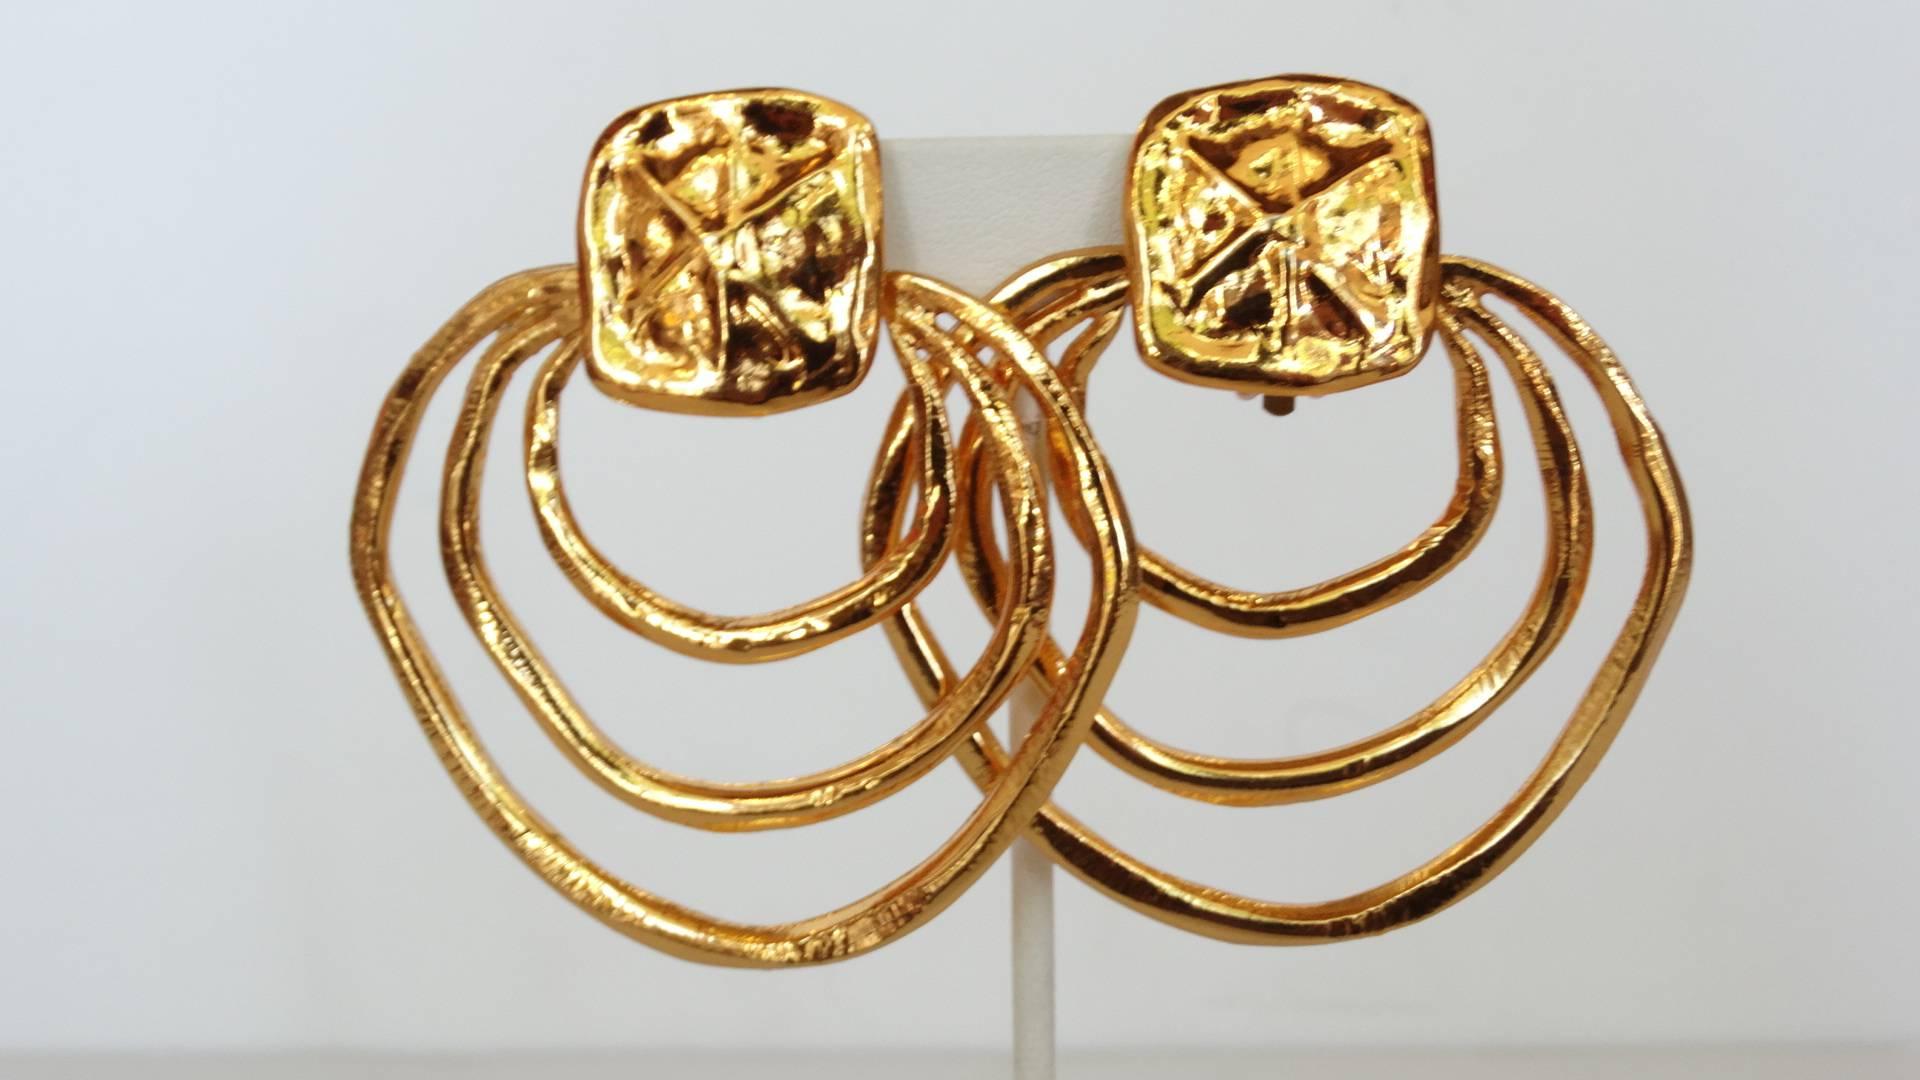 A triple hoop earring designed by the fabulous designer Christian Lacroix. Three hoops combined into one. Clip ons are in great condition. Signed Christian Lacroix on the earrings. Earrings are 3 inches long by 2.50 inches wide. These earrings are